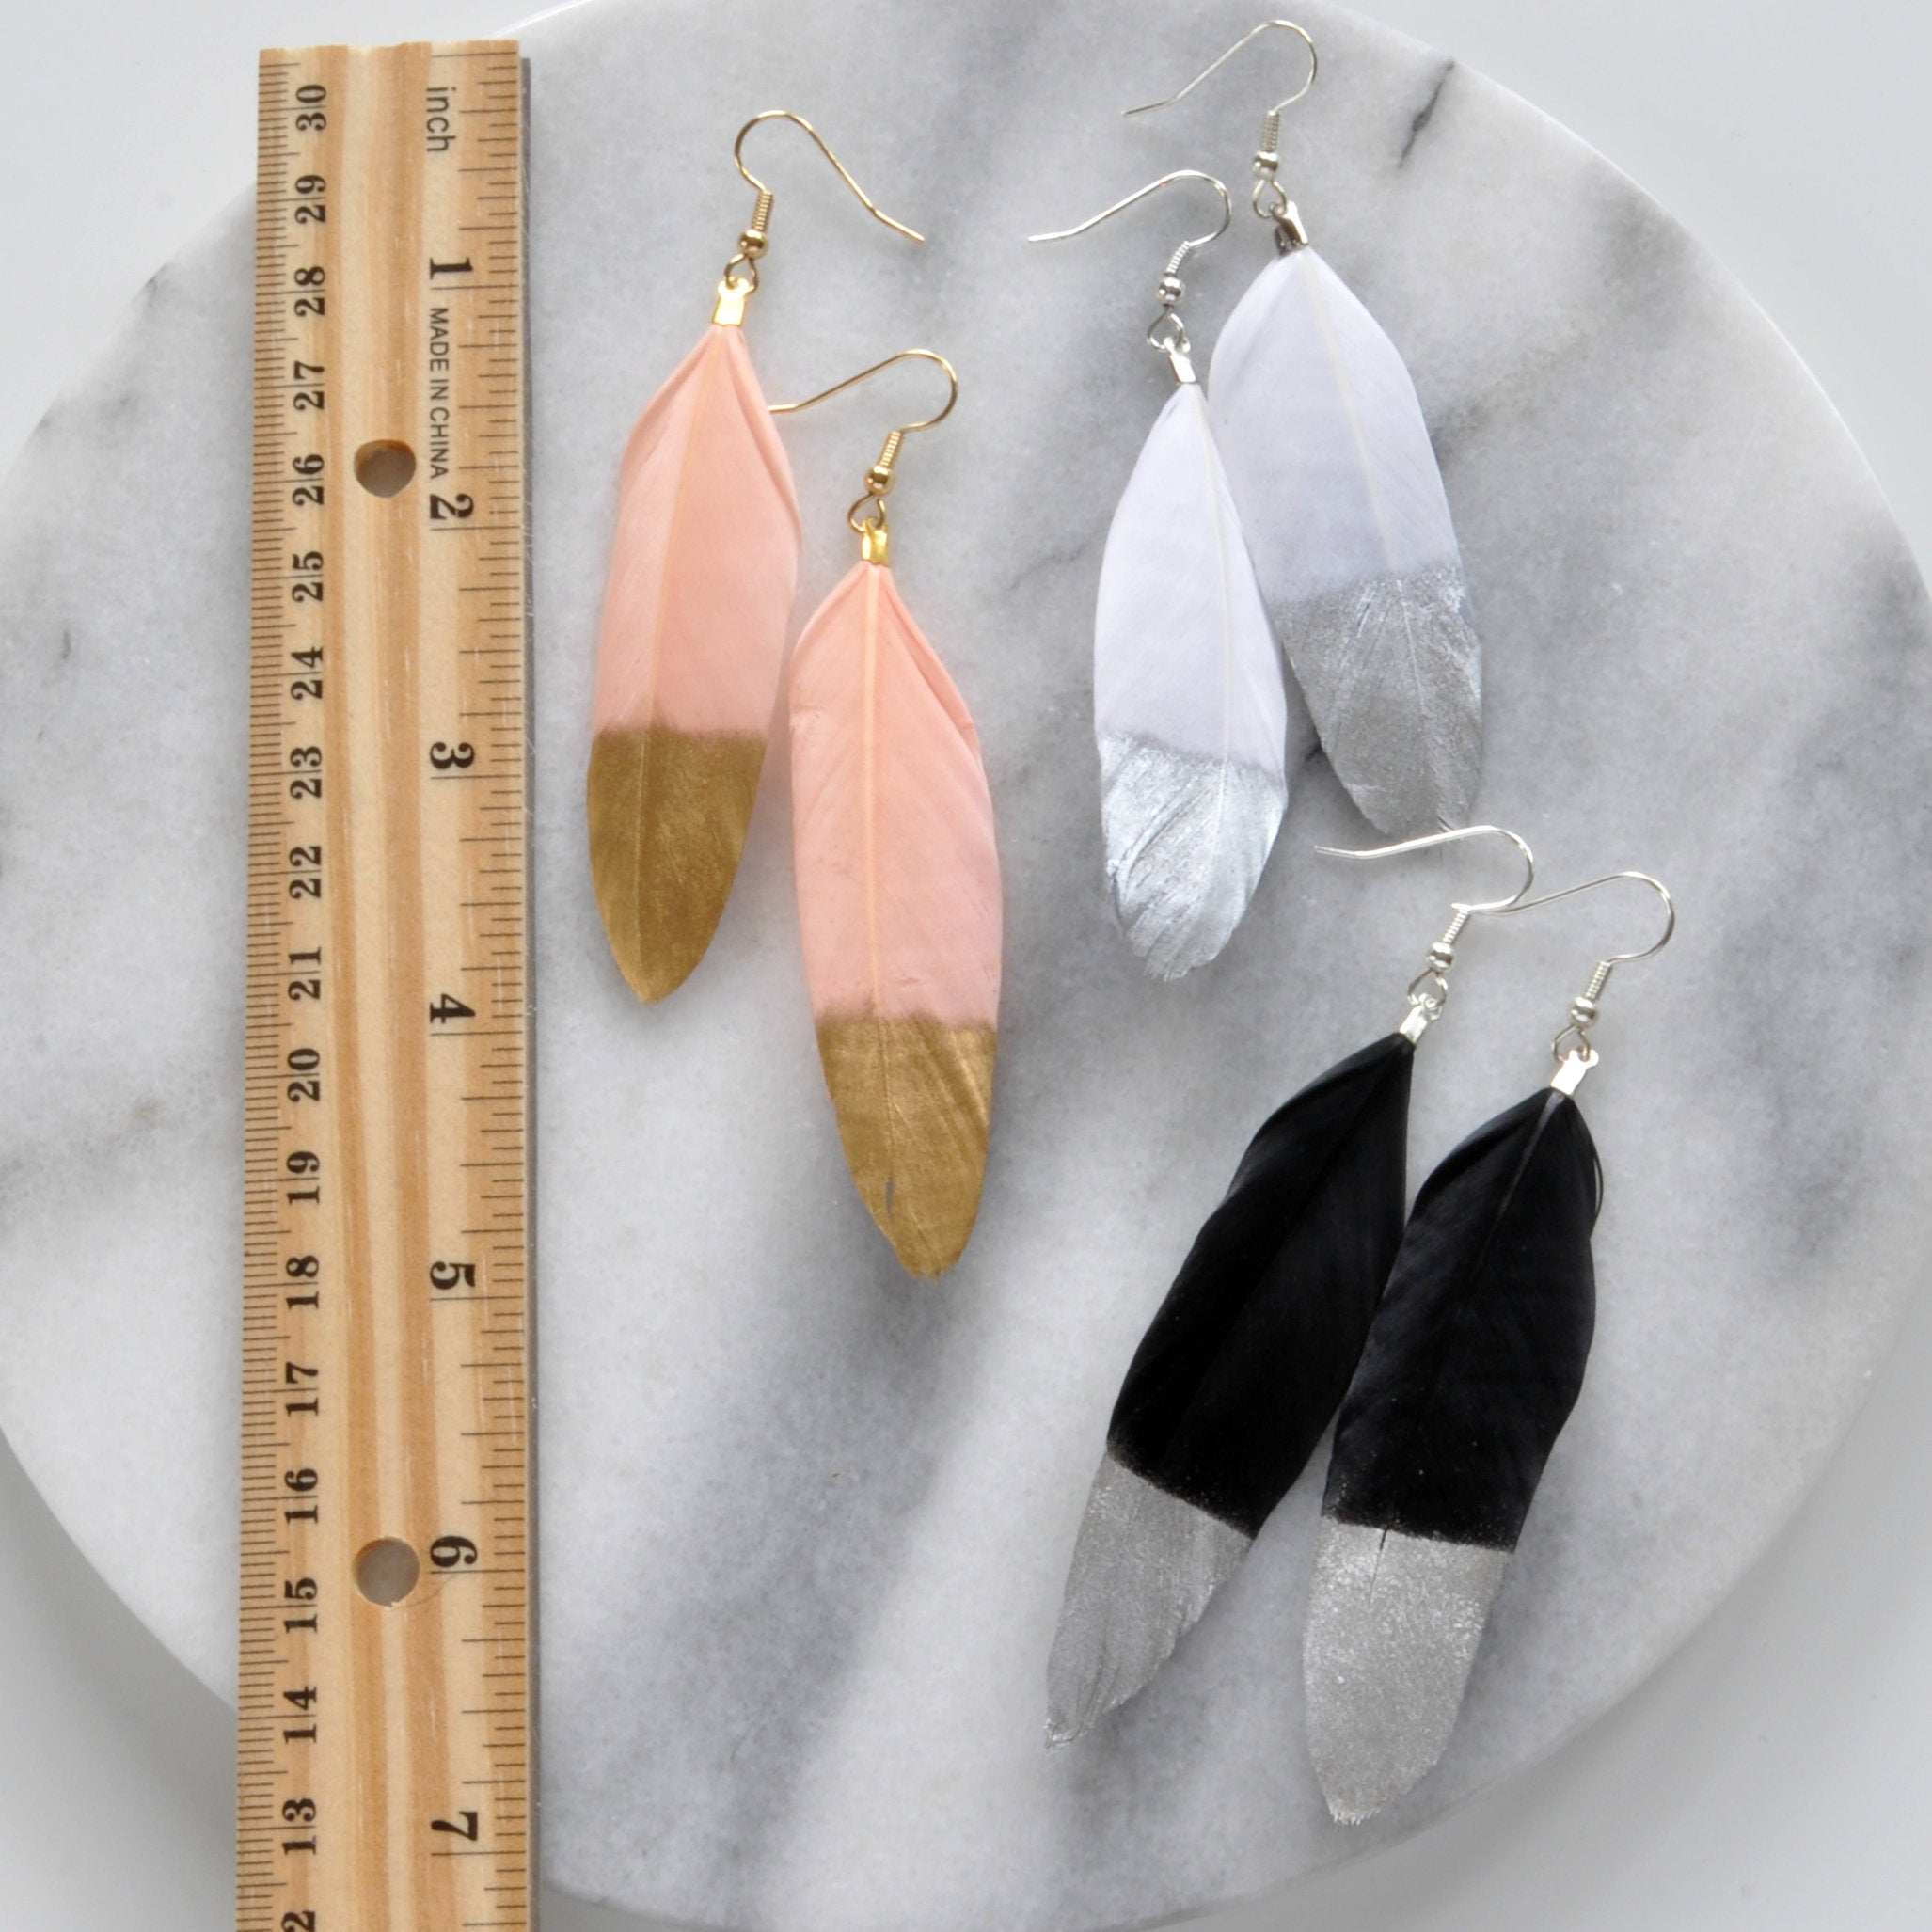 Libby & Smee Gold and Silver Feather Earrings in blush with gold, white with silver, black with silver, still life with ruler